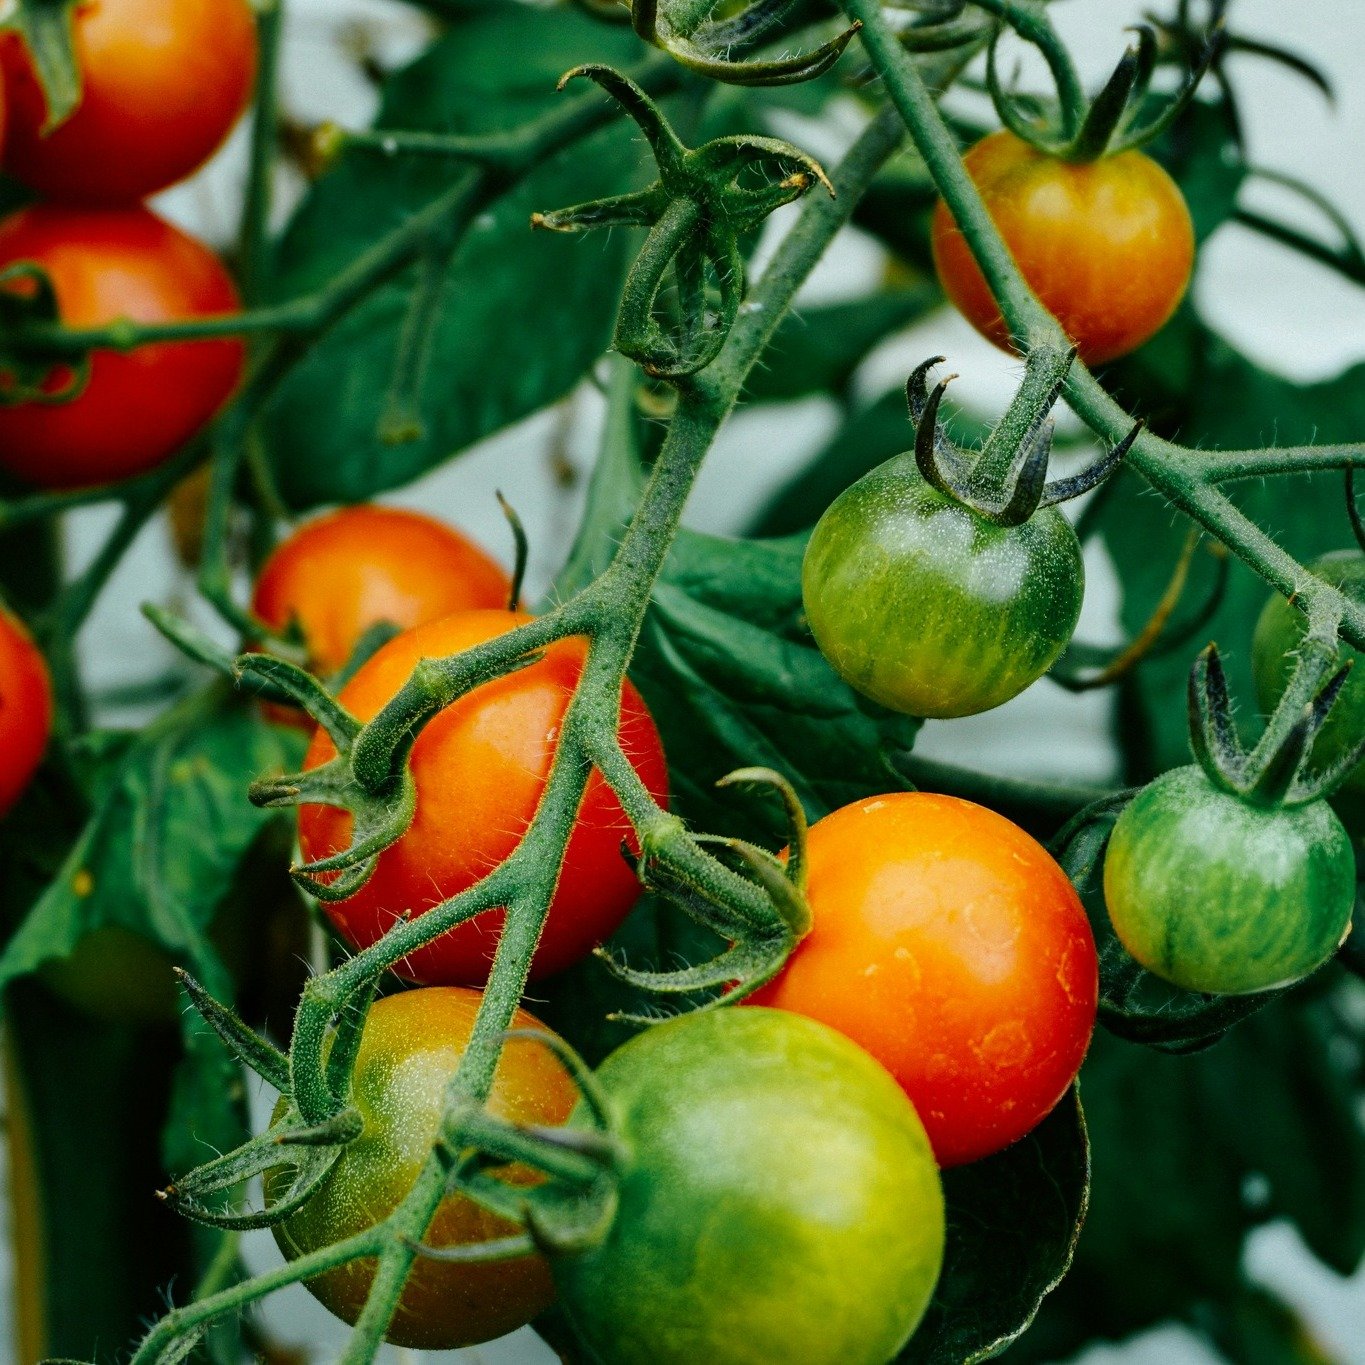 Here's a top tip for your vegetable plants! 🥕🍅 For healthier and more productive veggies, practice crop rotation. By rotating your vegetable crops each season, you help prevent soil depletion and reduce the risk of disease buildup. Plus, it optimiz